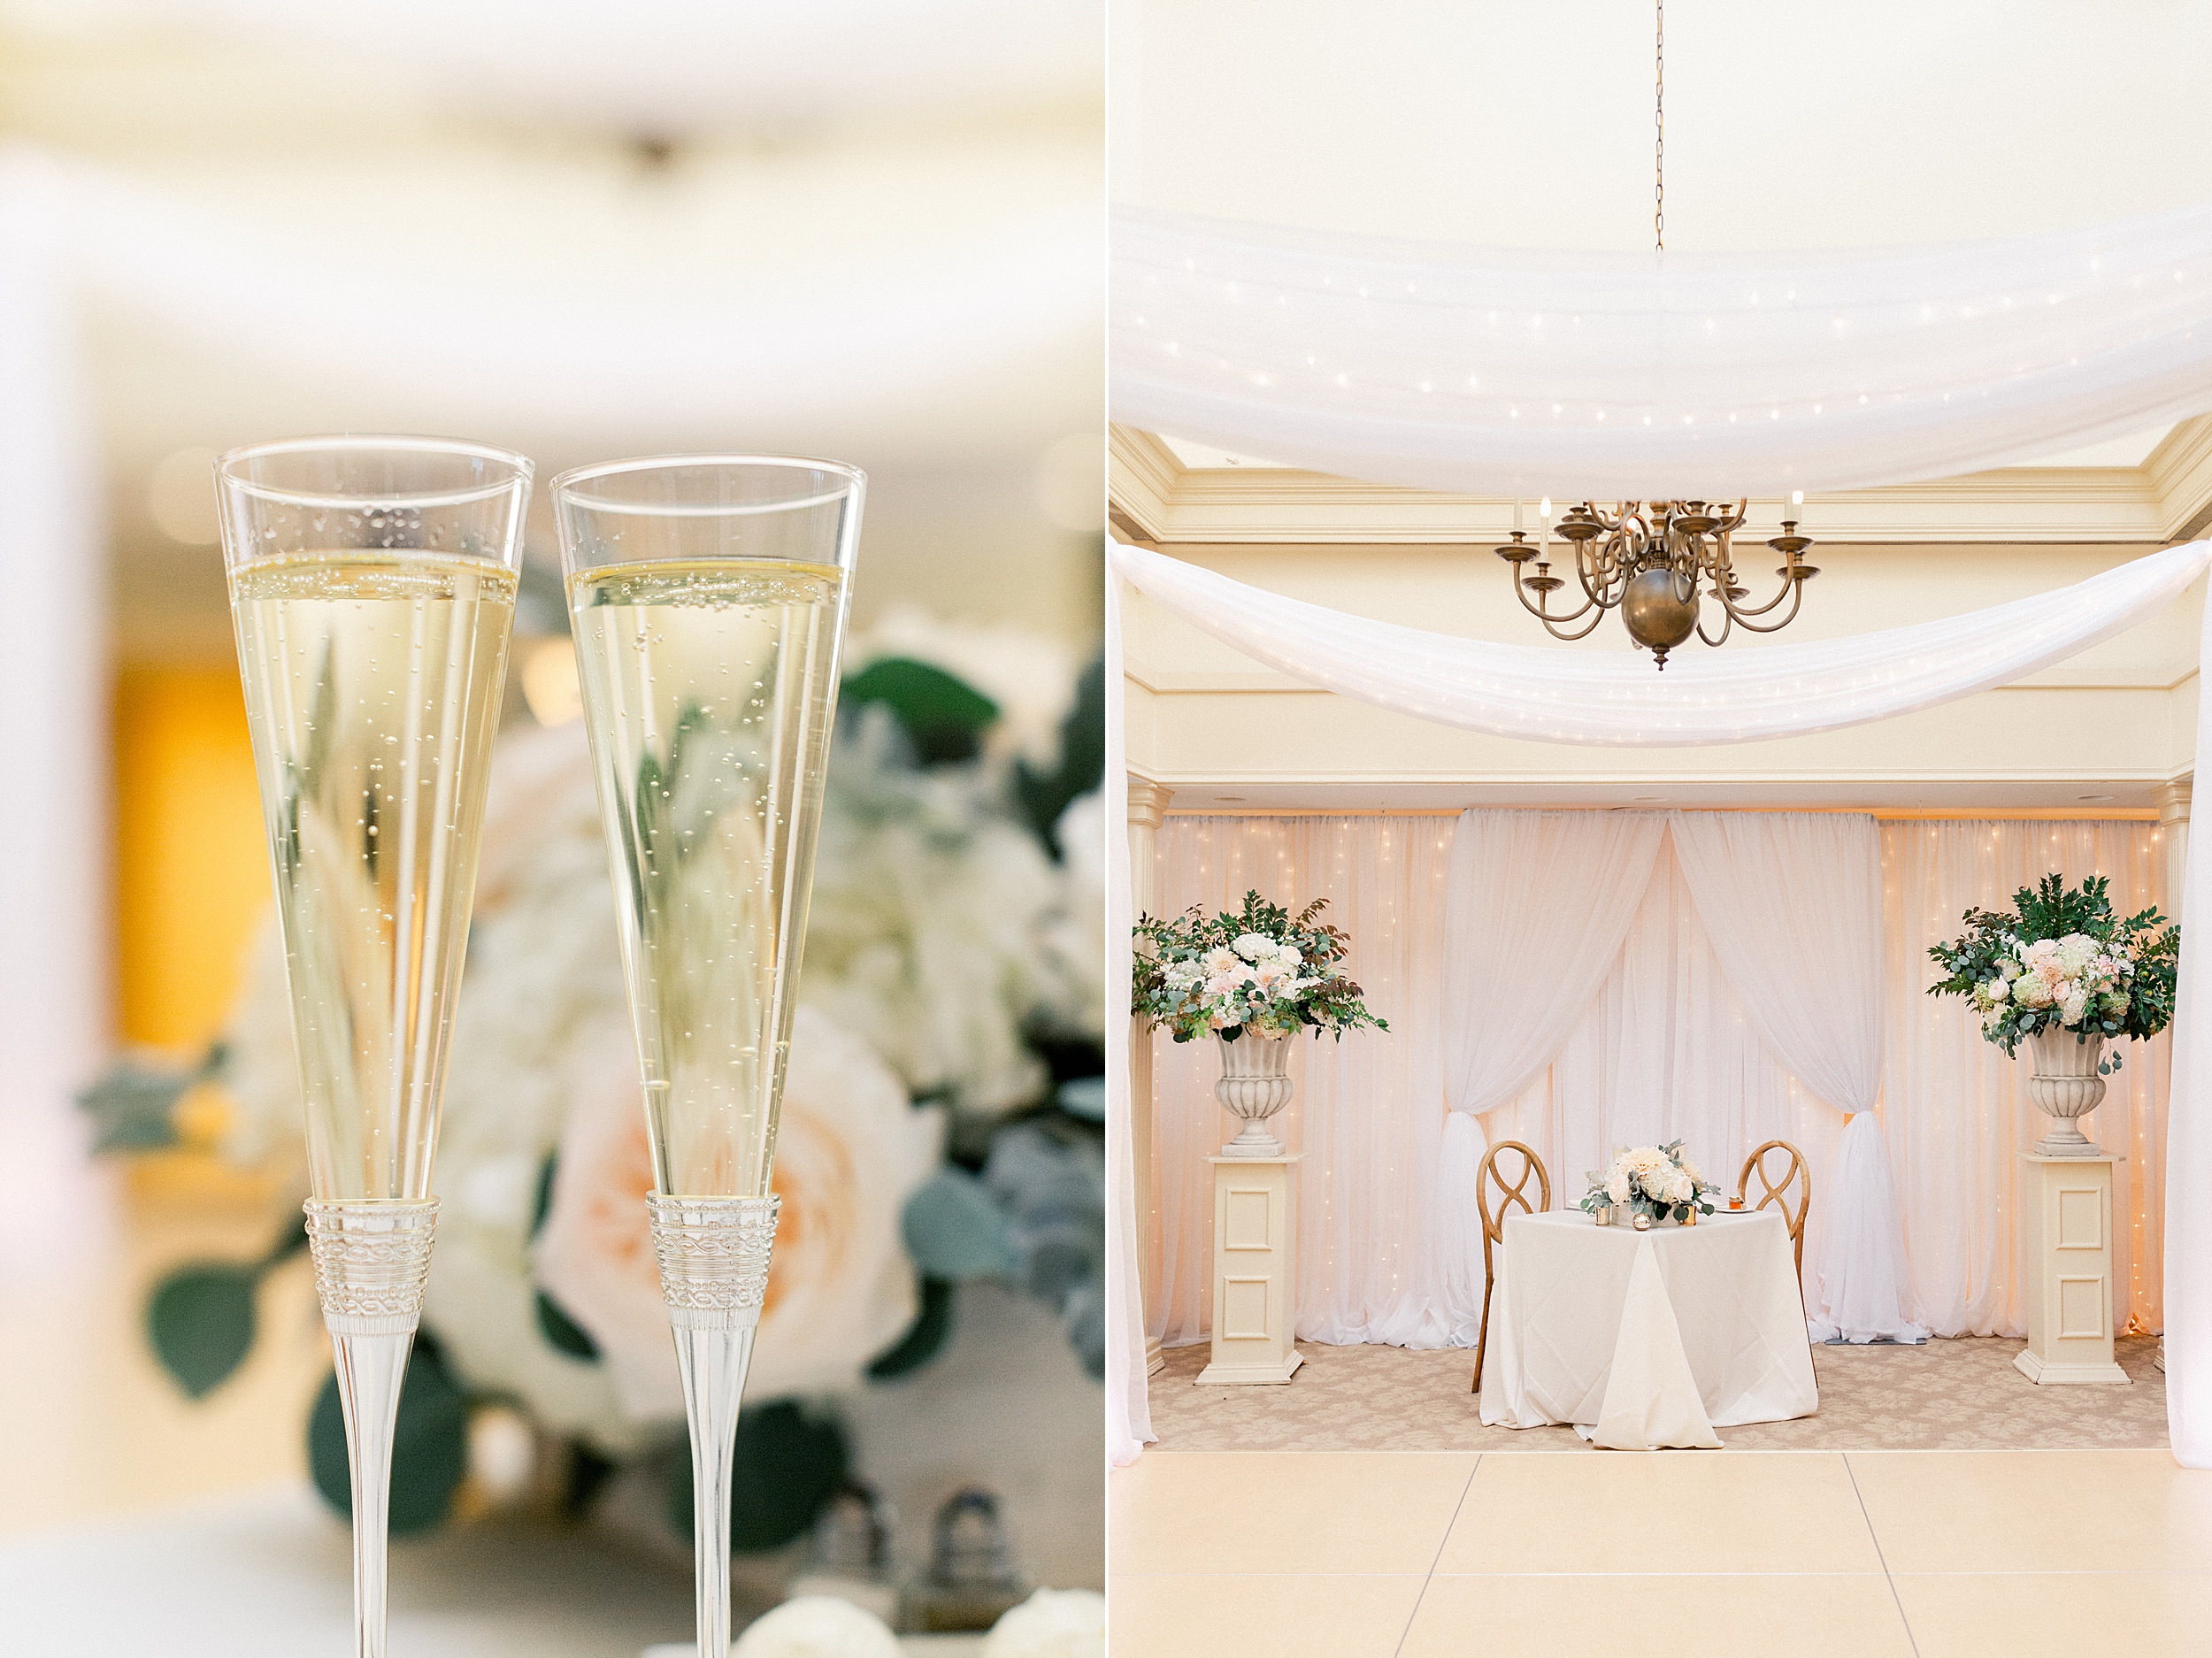 champagne flites and ballroom with lighting flowers and drapery in york harbor inn